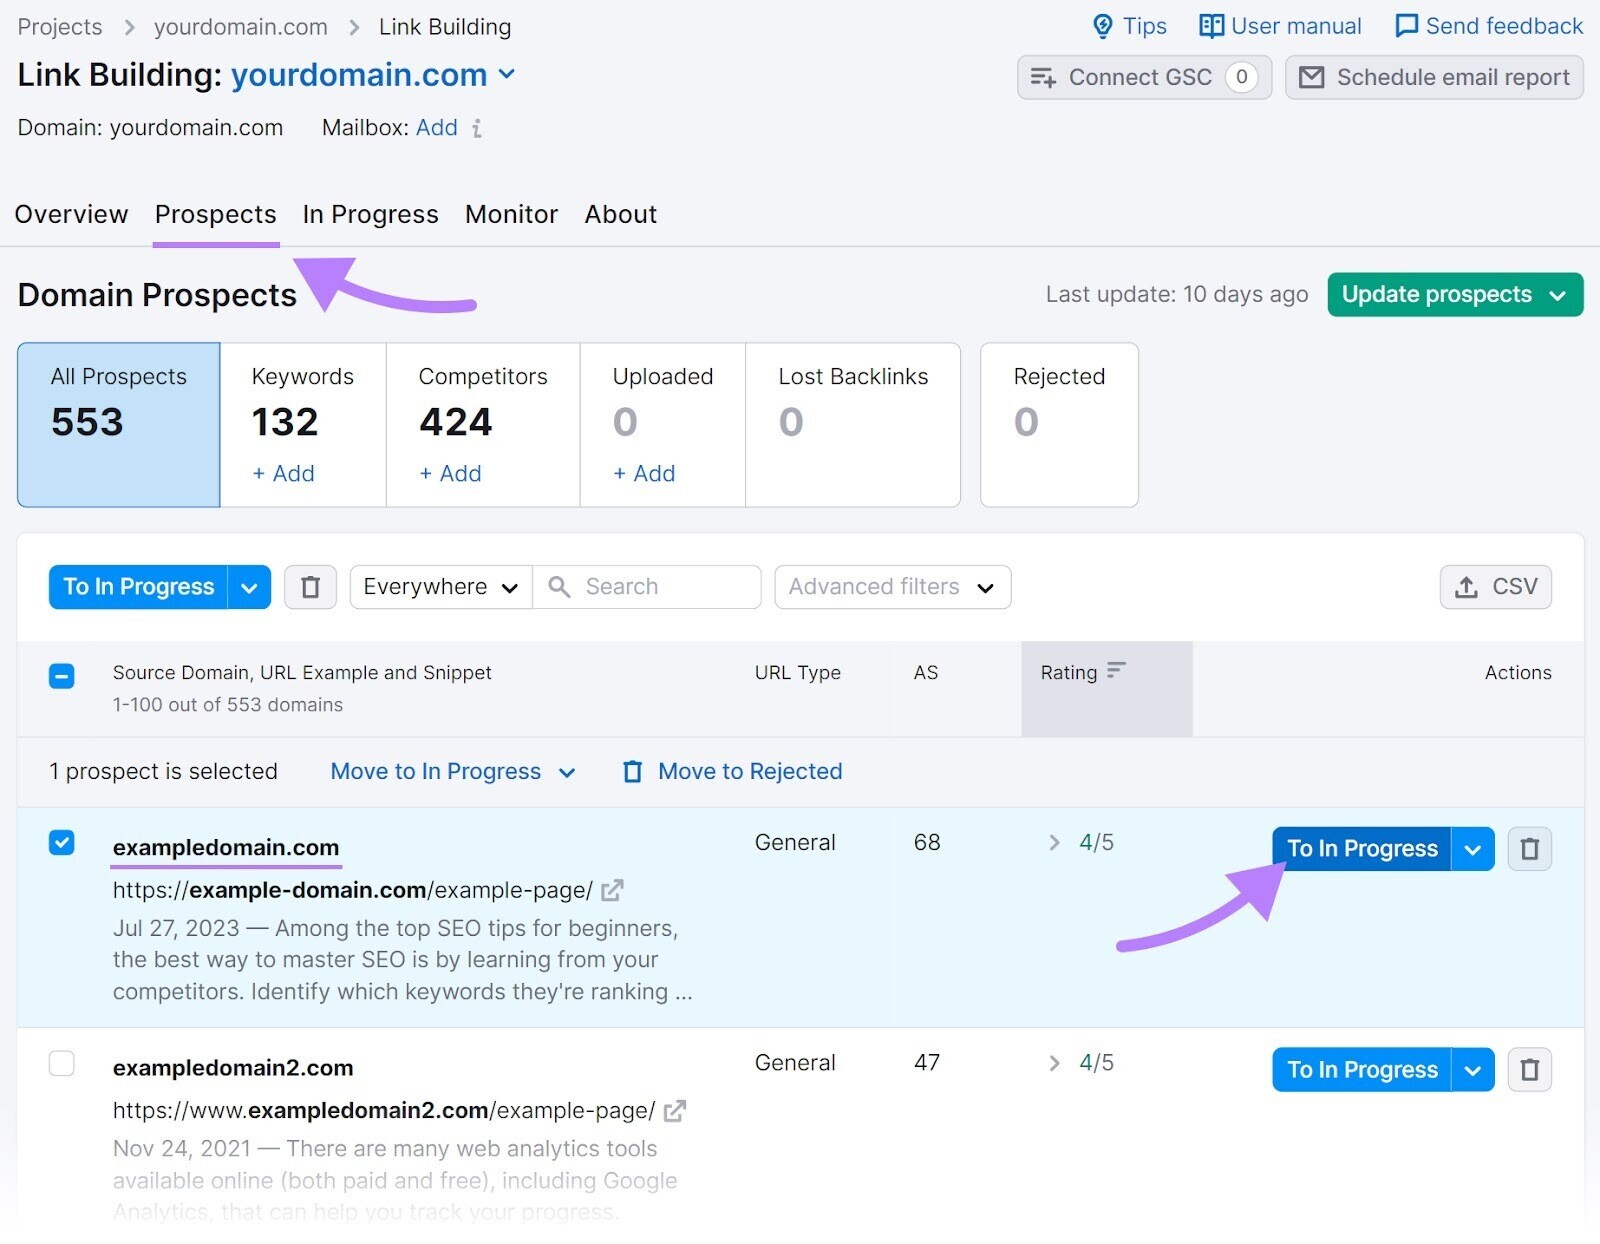 Link Building tool's "Prospects" tab